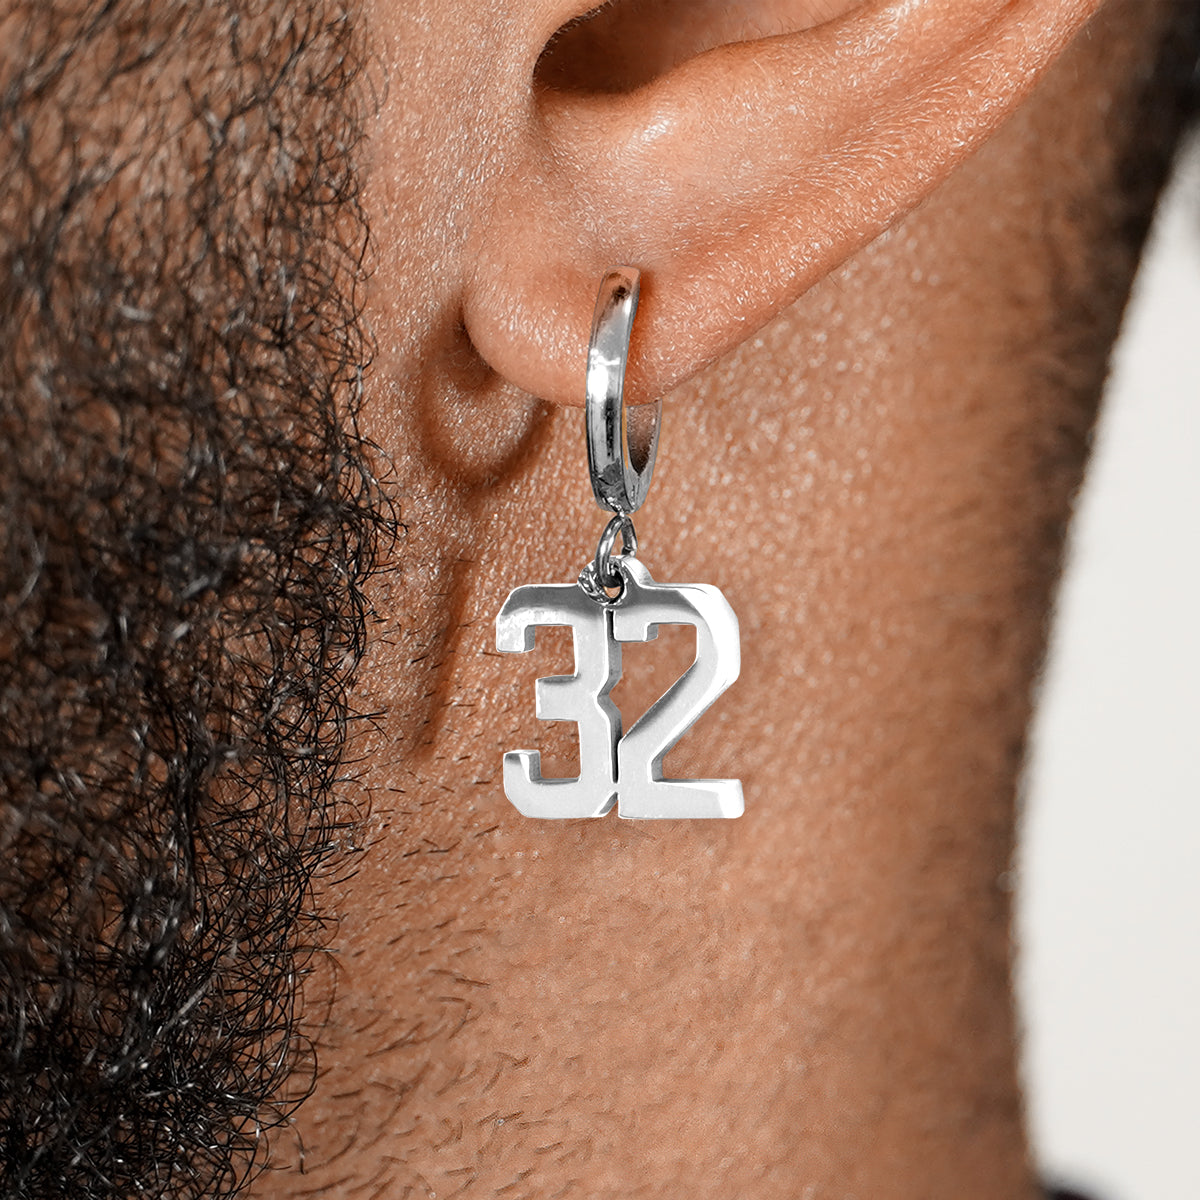 32 Number Earring - Stainless Steel